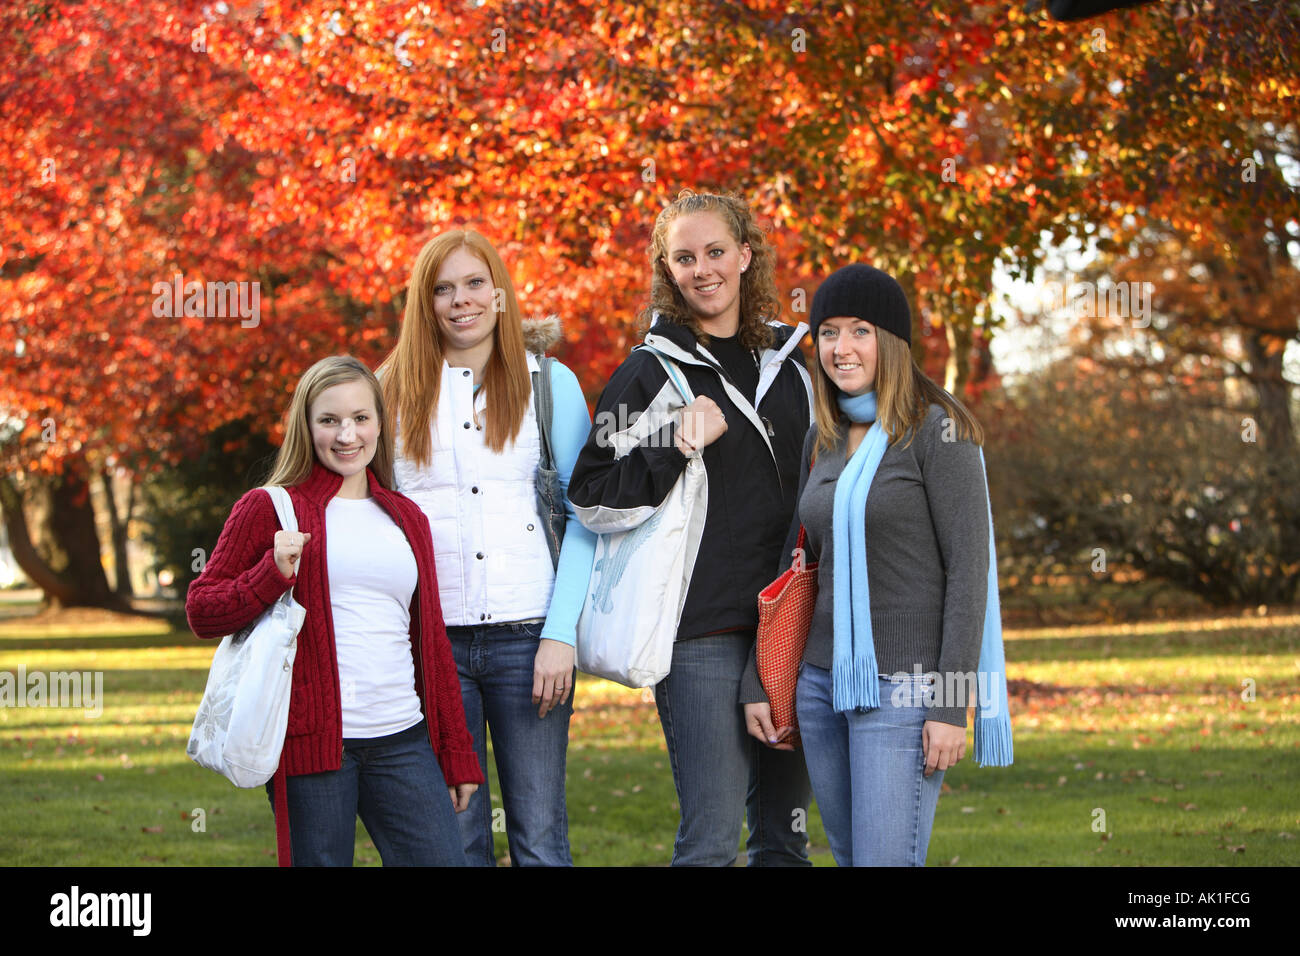 Group of college students on campus Stock Photo